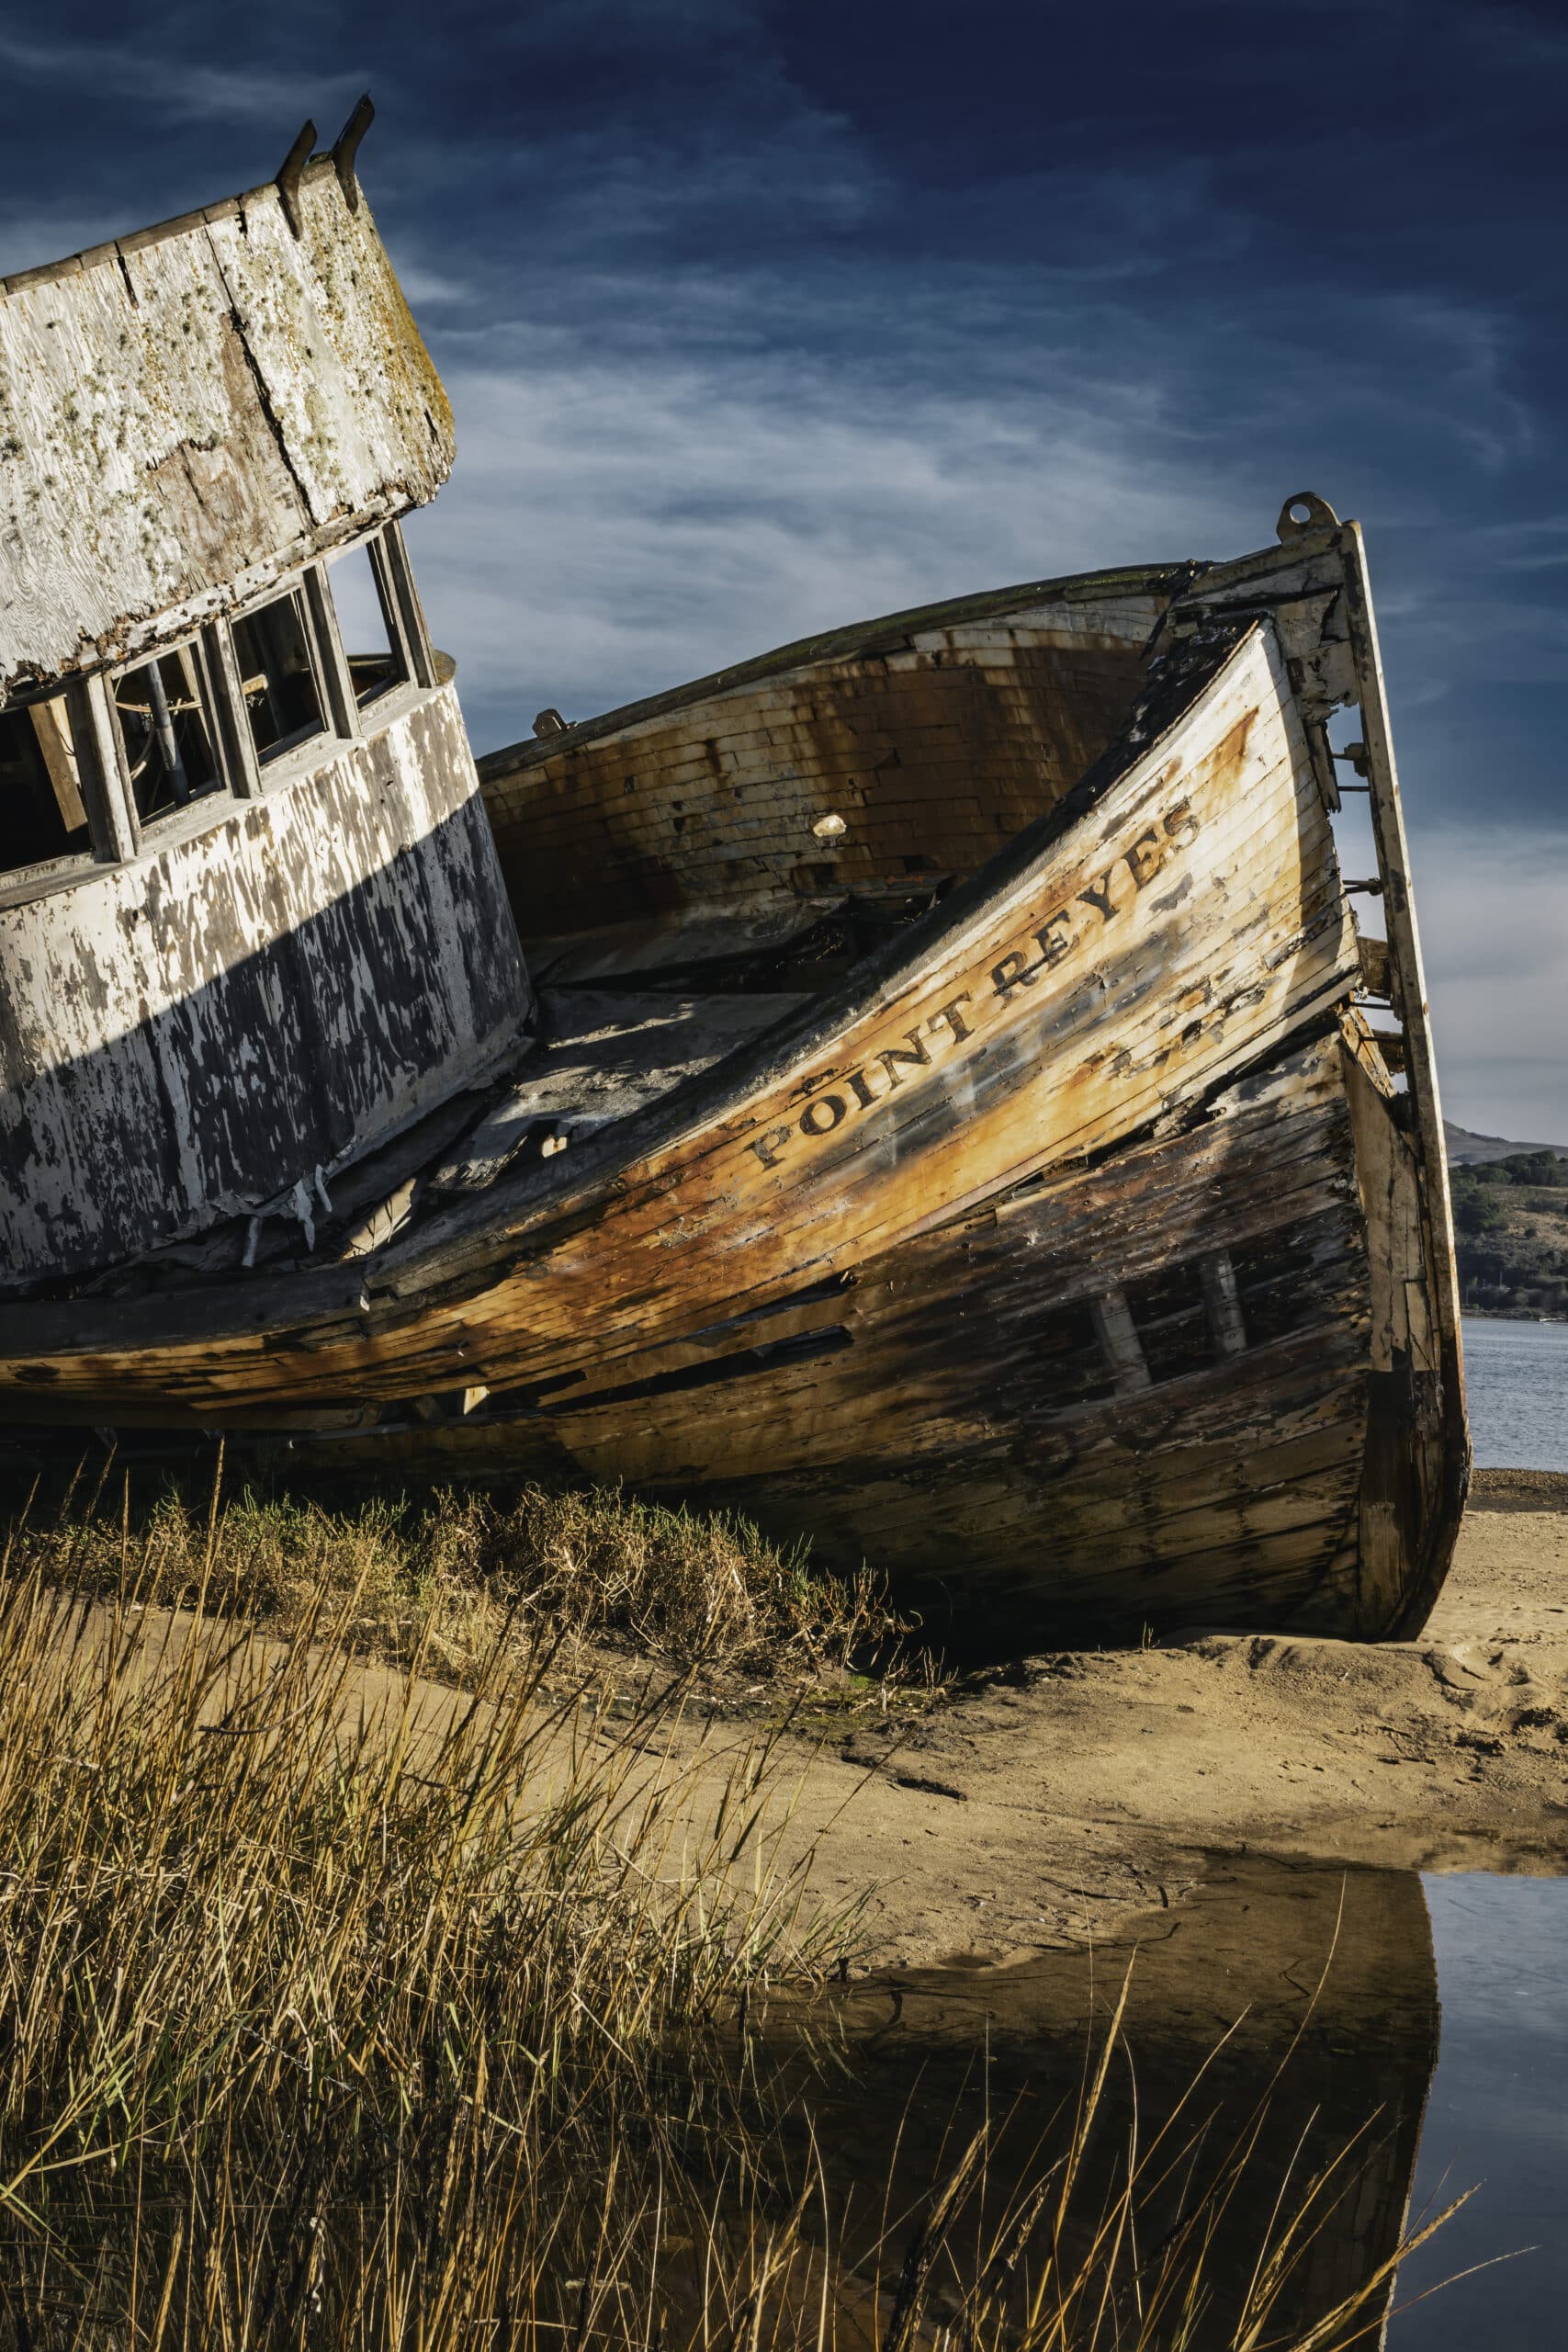 An old wrecked boat